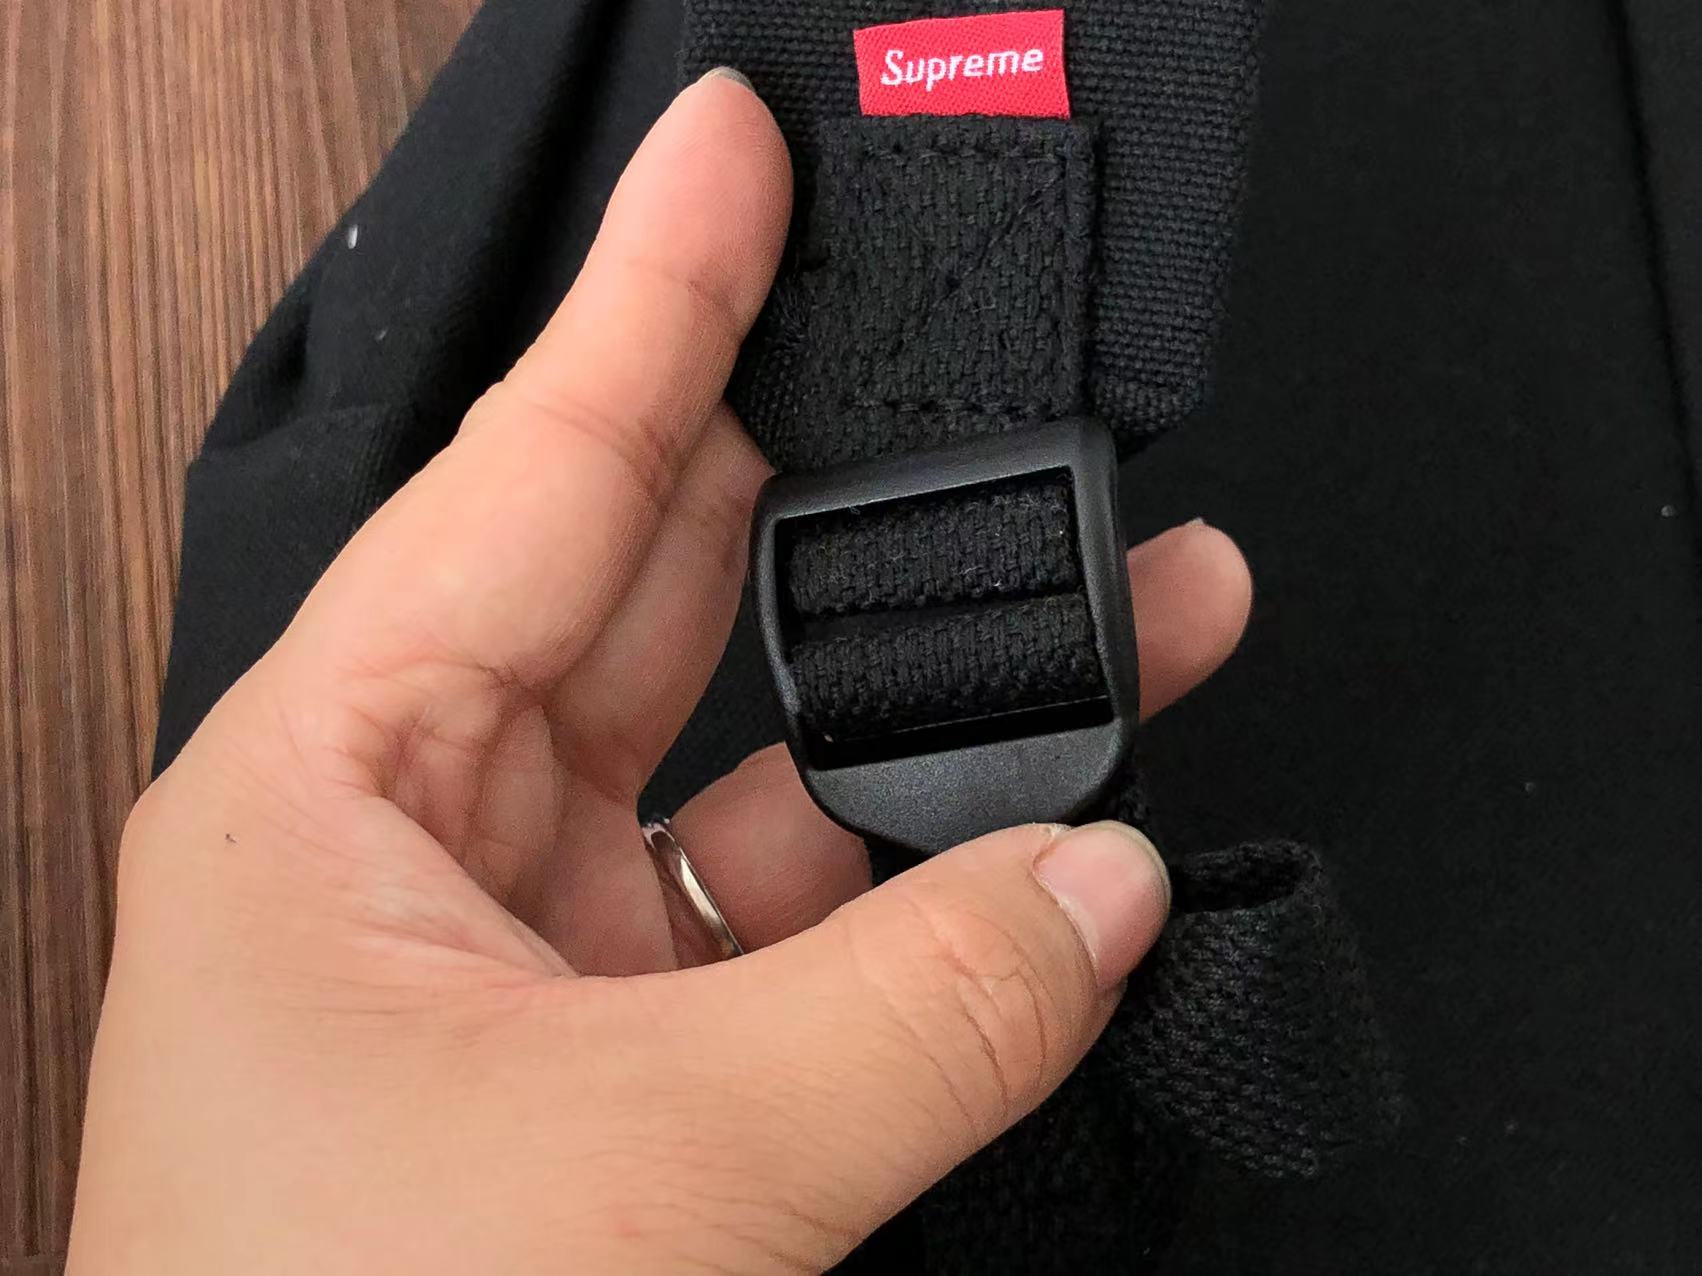 Supreme Canvas Backpack: Elegance and Style in a Fashion Icon